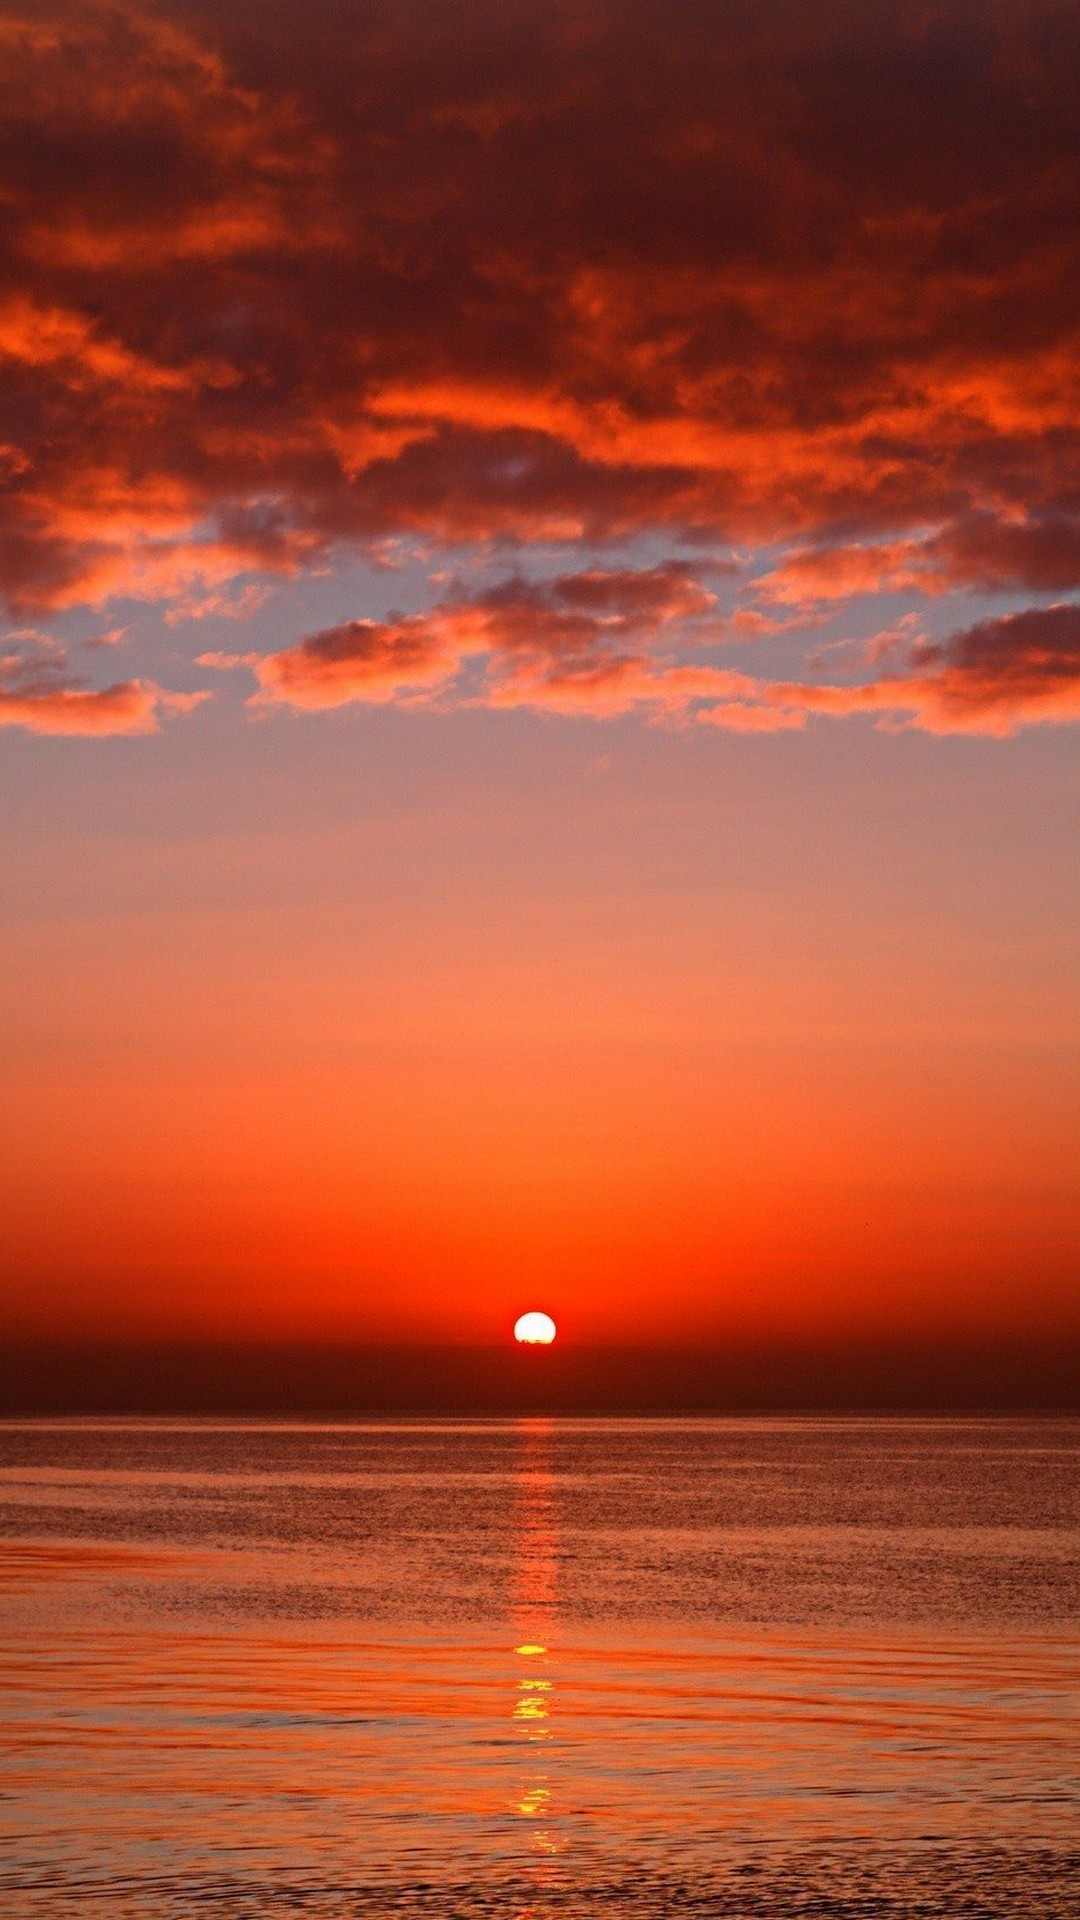 Sunset Wallpaper for iPhone With high-resolution 1080X1920 pixel. You can use this wallpaper for your iPhone 5, 6, 7, 8, X, XS, XR backgrounds, Mobile Screensaver, or iPad Lock Screen